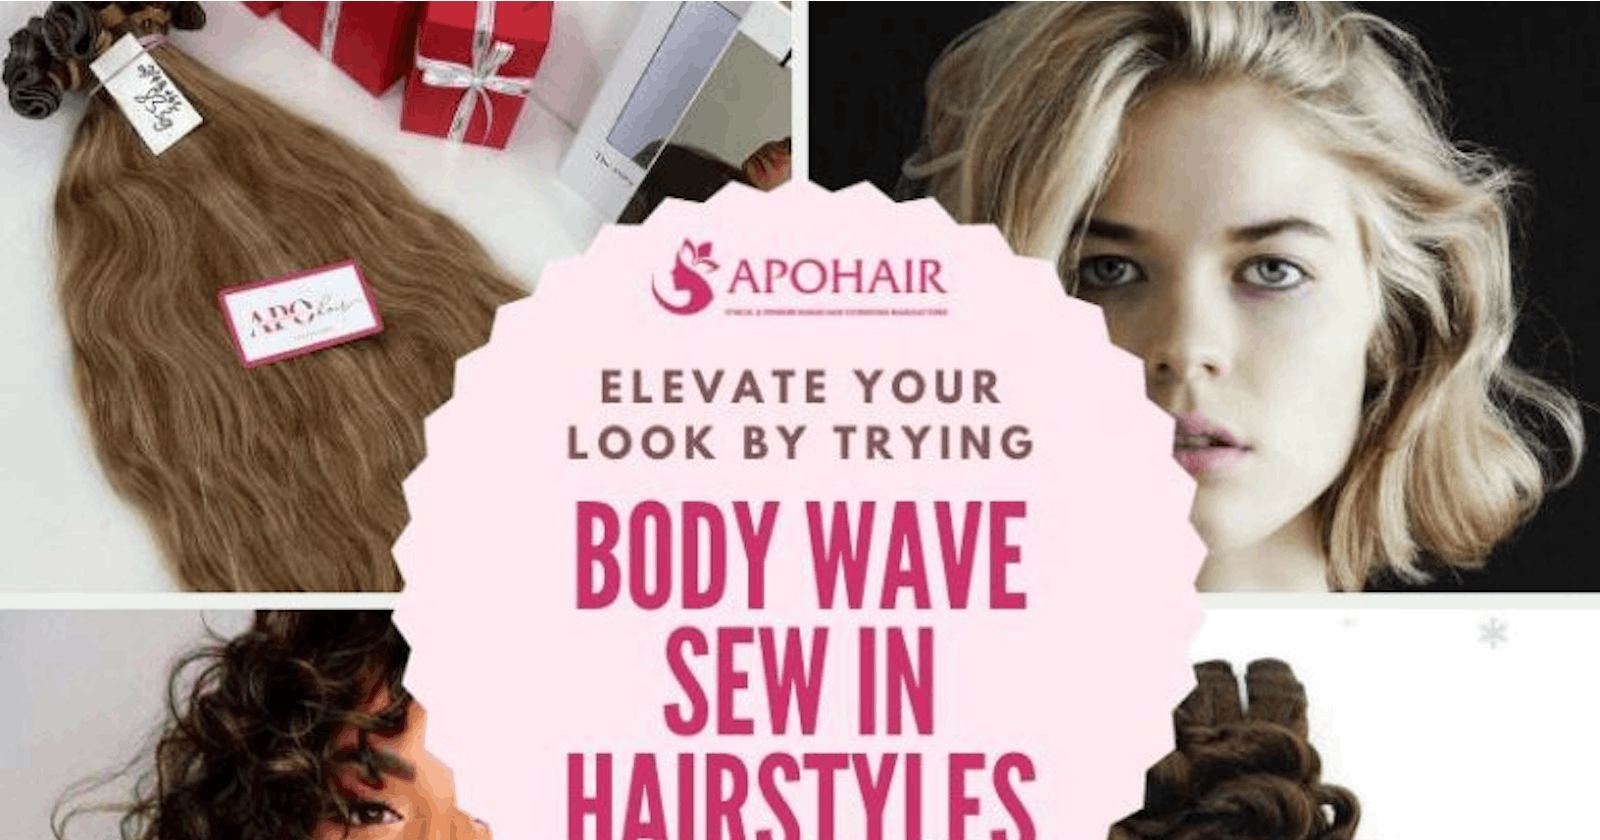 Elevate Your Look With Body Wave Sew In Hairstyles